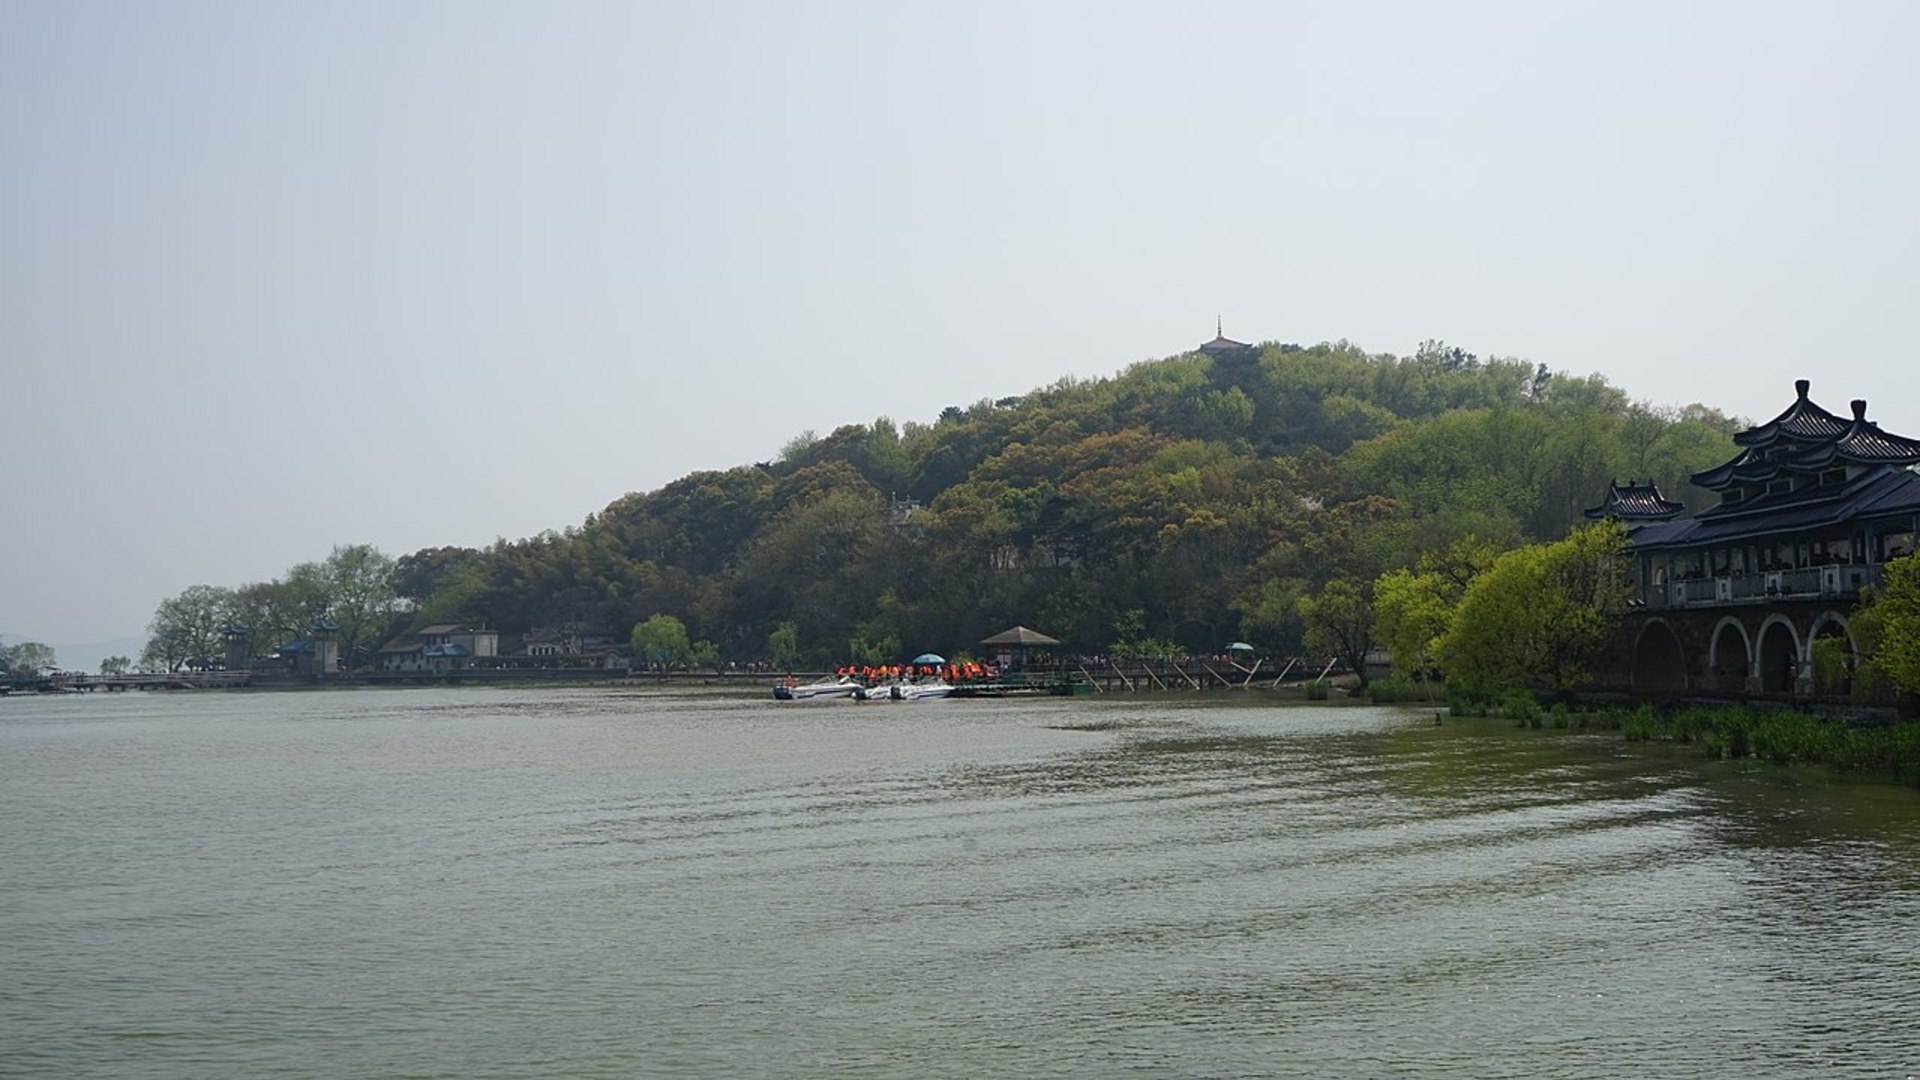 Cyanobacterial blooms in Lake Taihu - Construction and demonstration of a field observation station